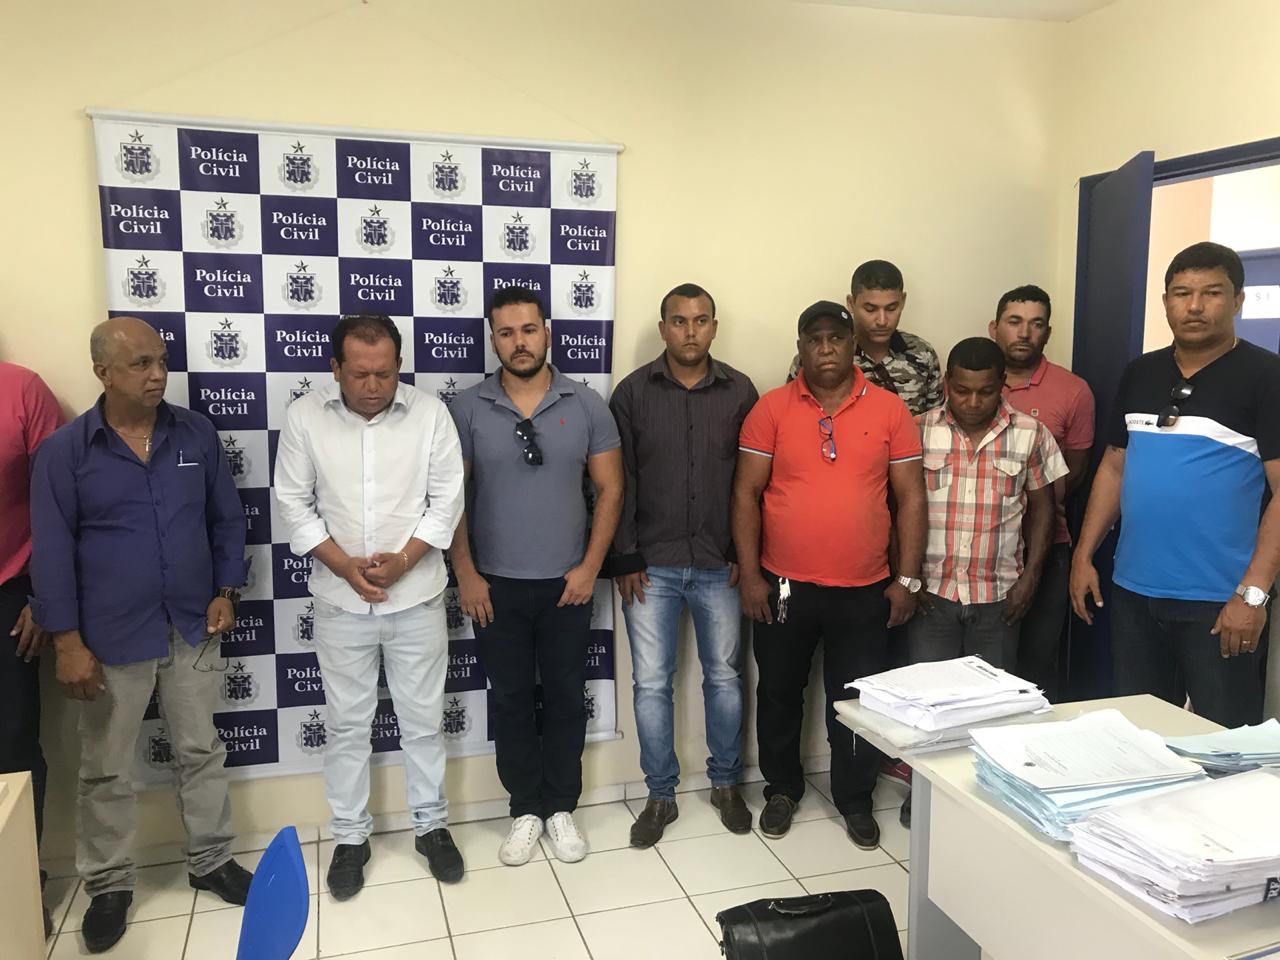 Photo of a apprehended criminal gang standing in police station